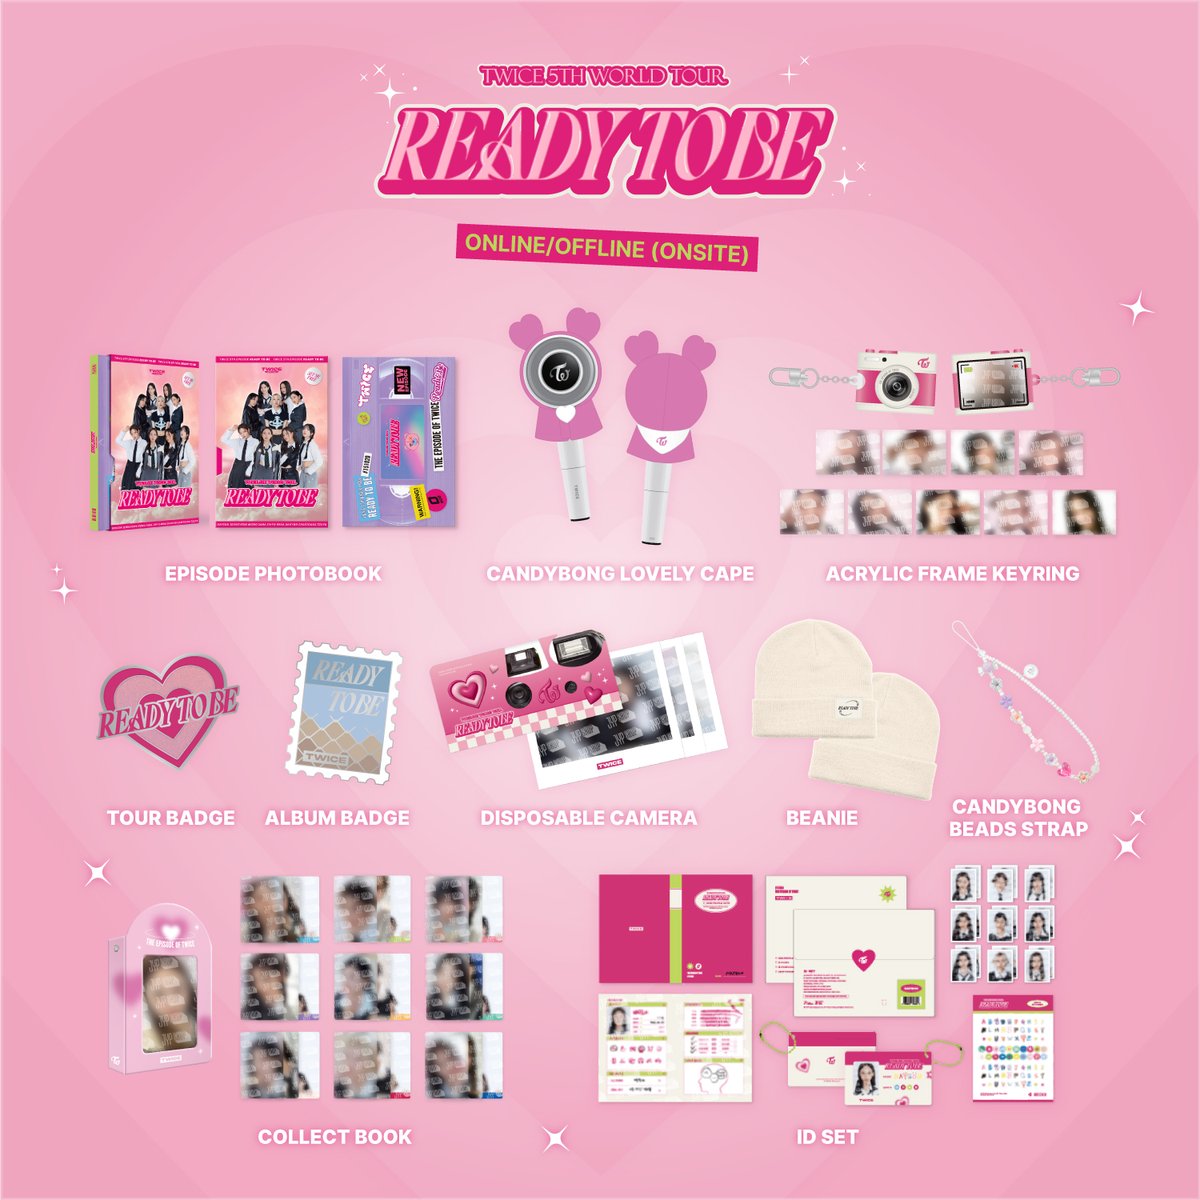 230412 thejypshop Twitter Update - TWICE 5TH WORLD TOUR 'READY TO